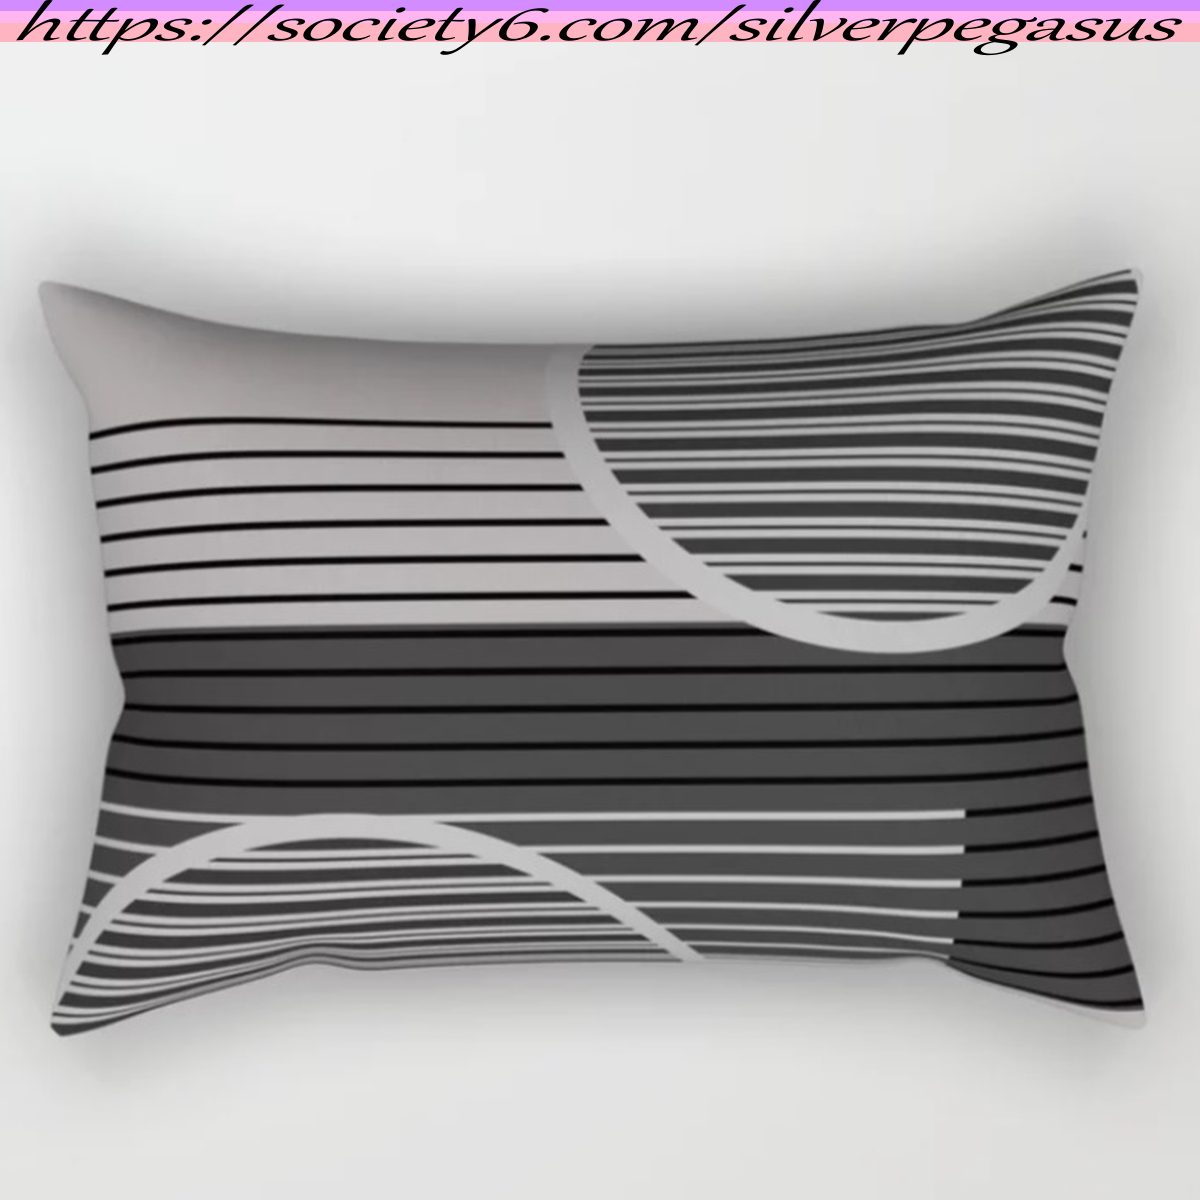 Black by Silverpegasus on Throw Pillow Society6 Leopard Print 2.0 